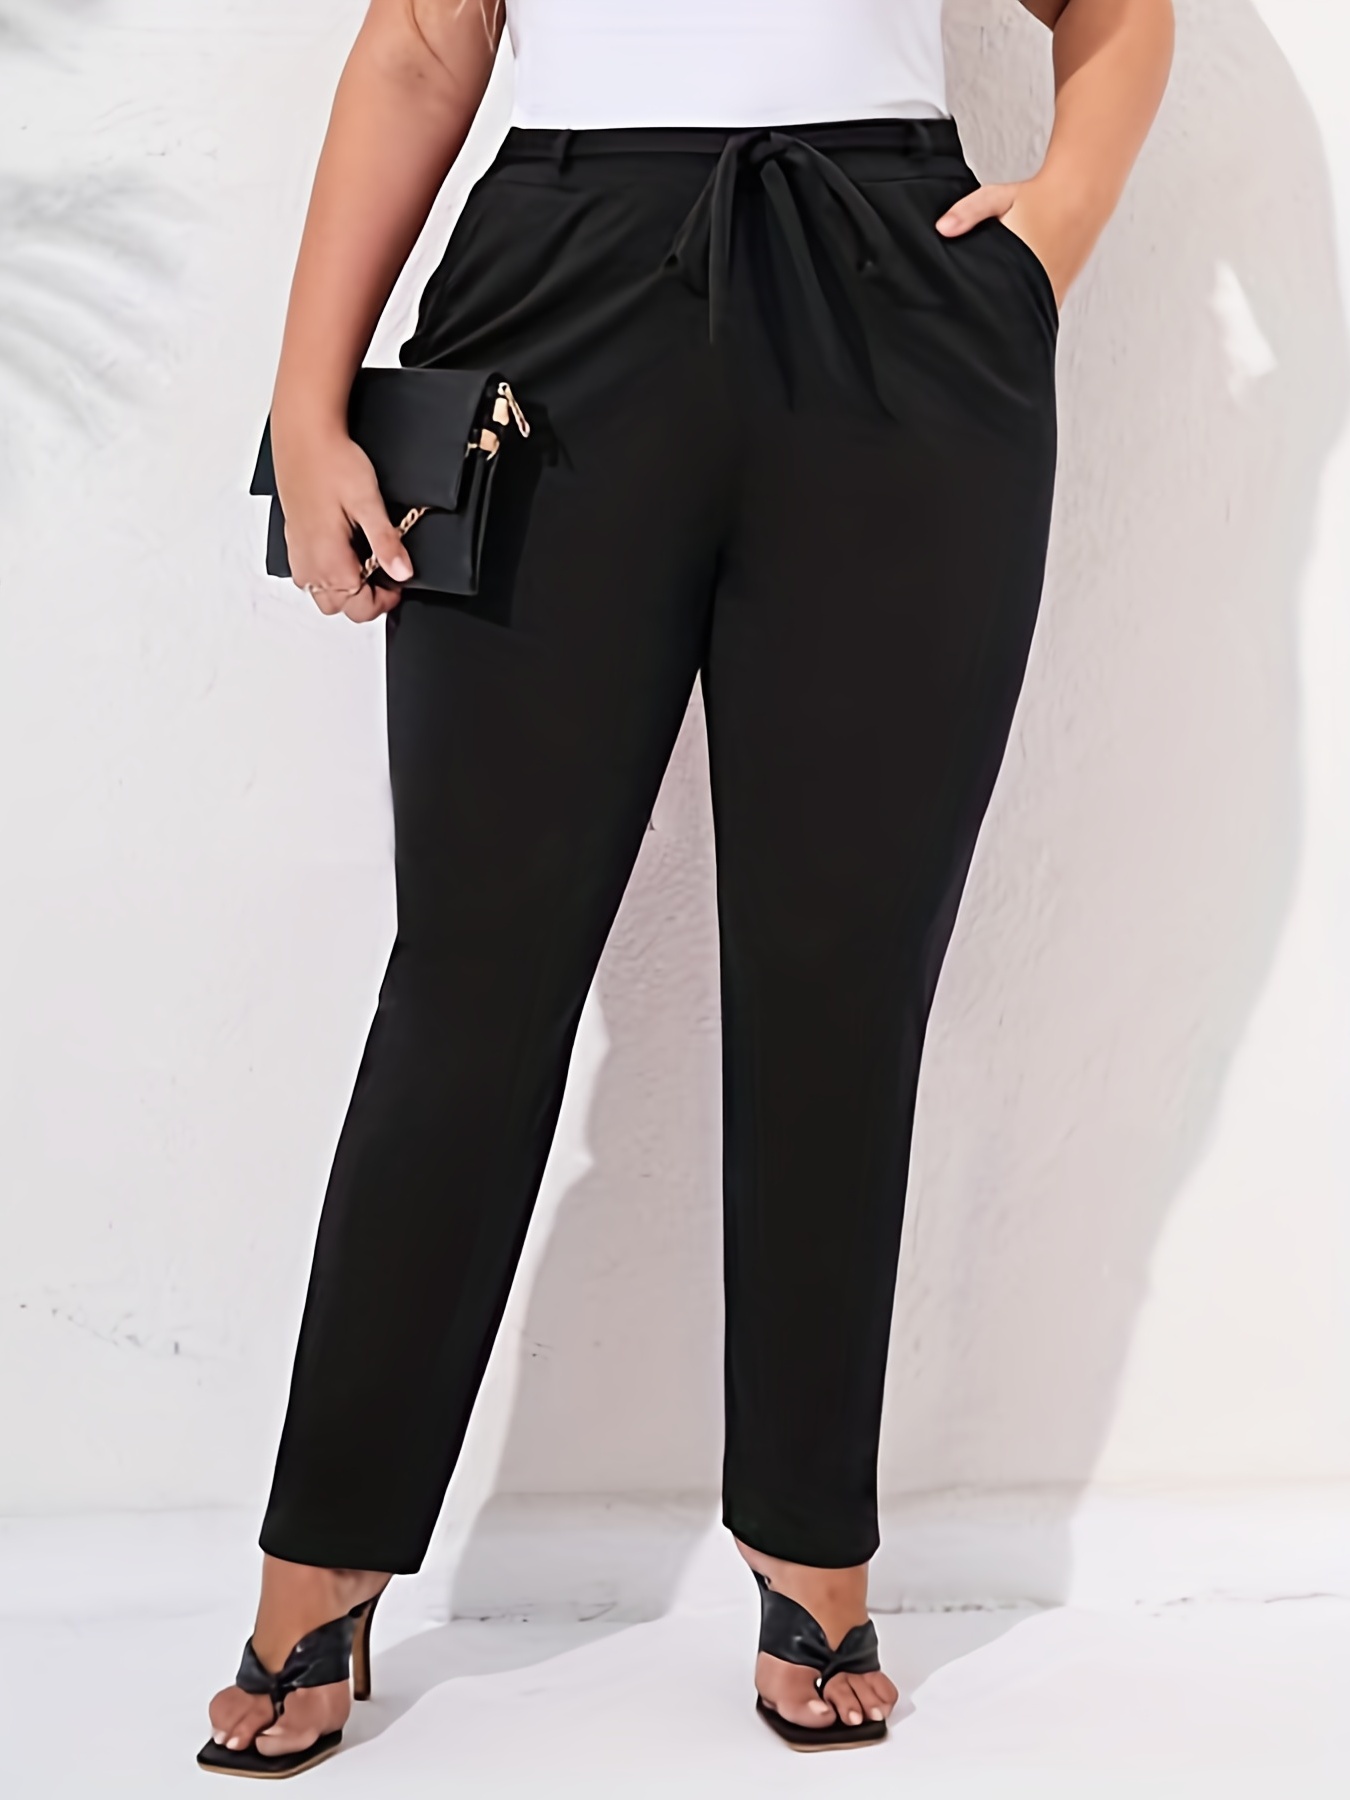 Plus Size Solid Color Drawstring Pocket Pants, Trousers, Women's Solid Drawstring High Rise High Stretch Knot Casual Pants,SUN/UV Protection,Temu